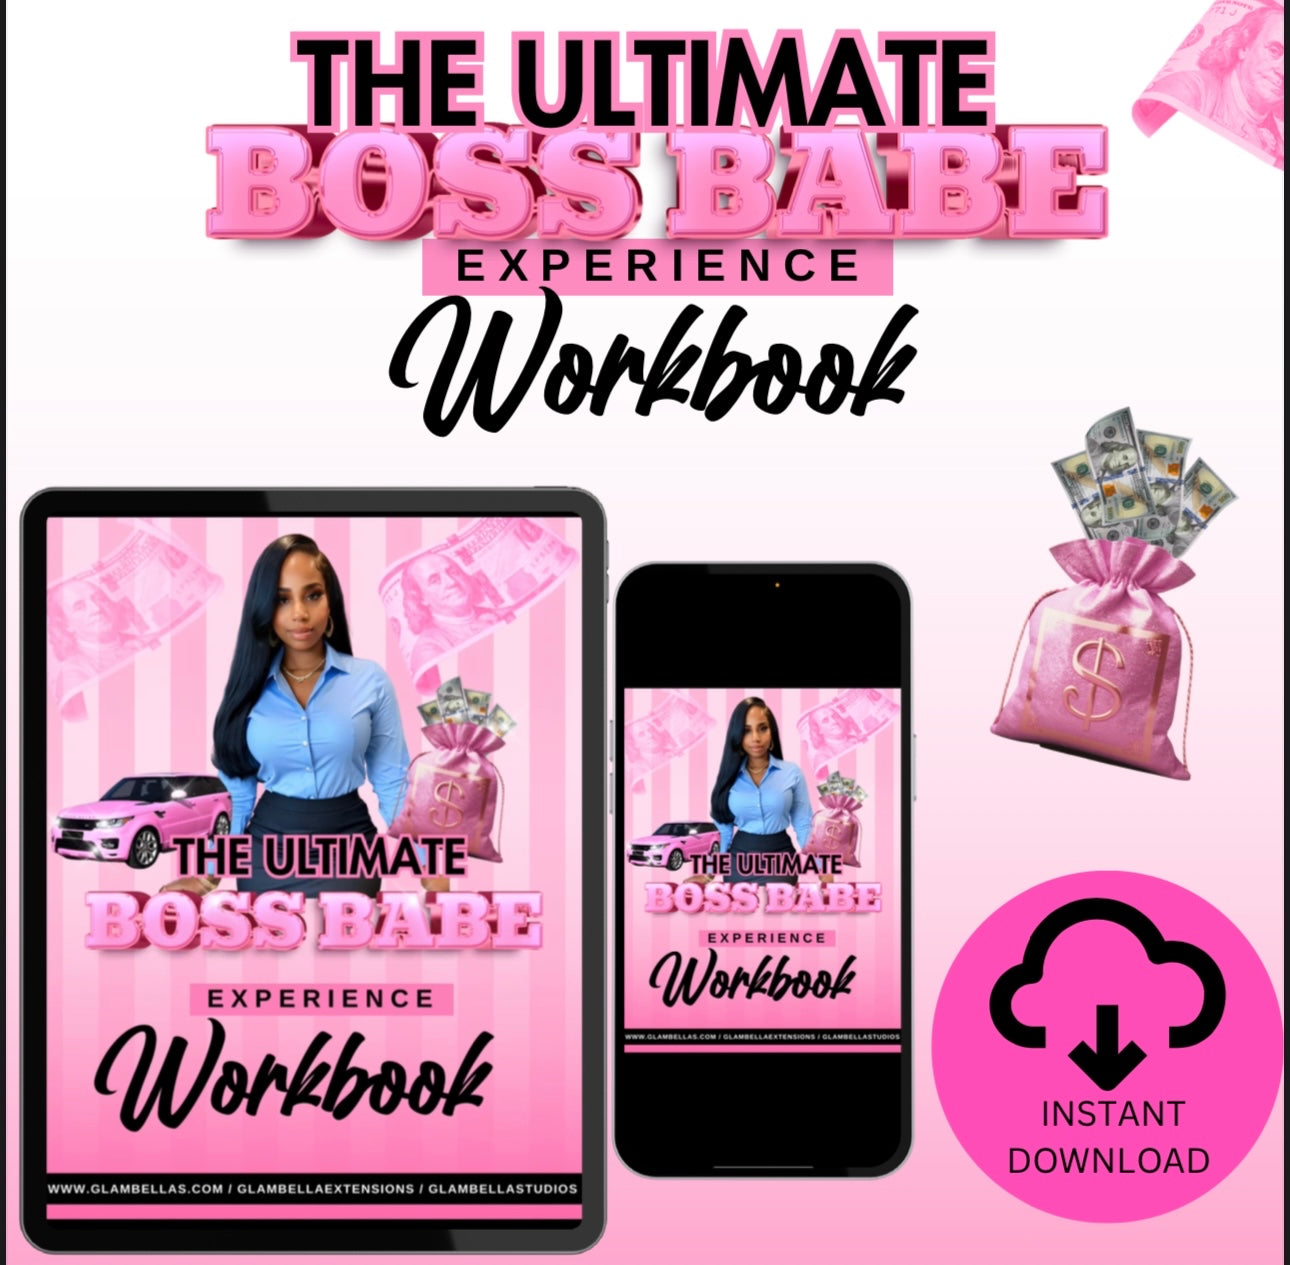 The Ultimate Boss Babe Workbook